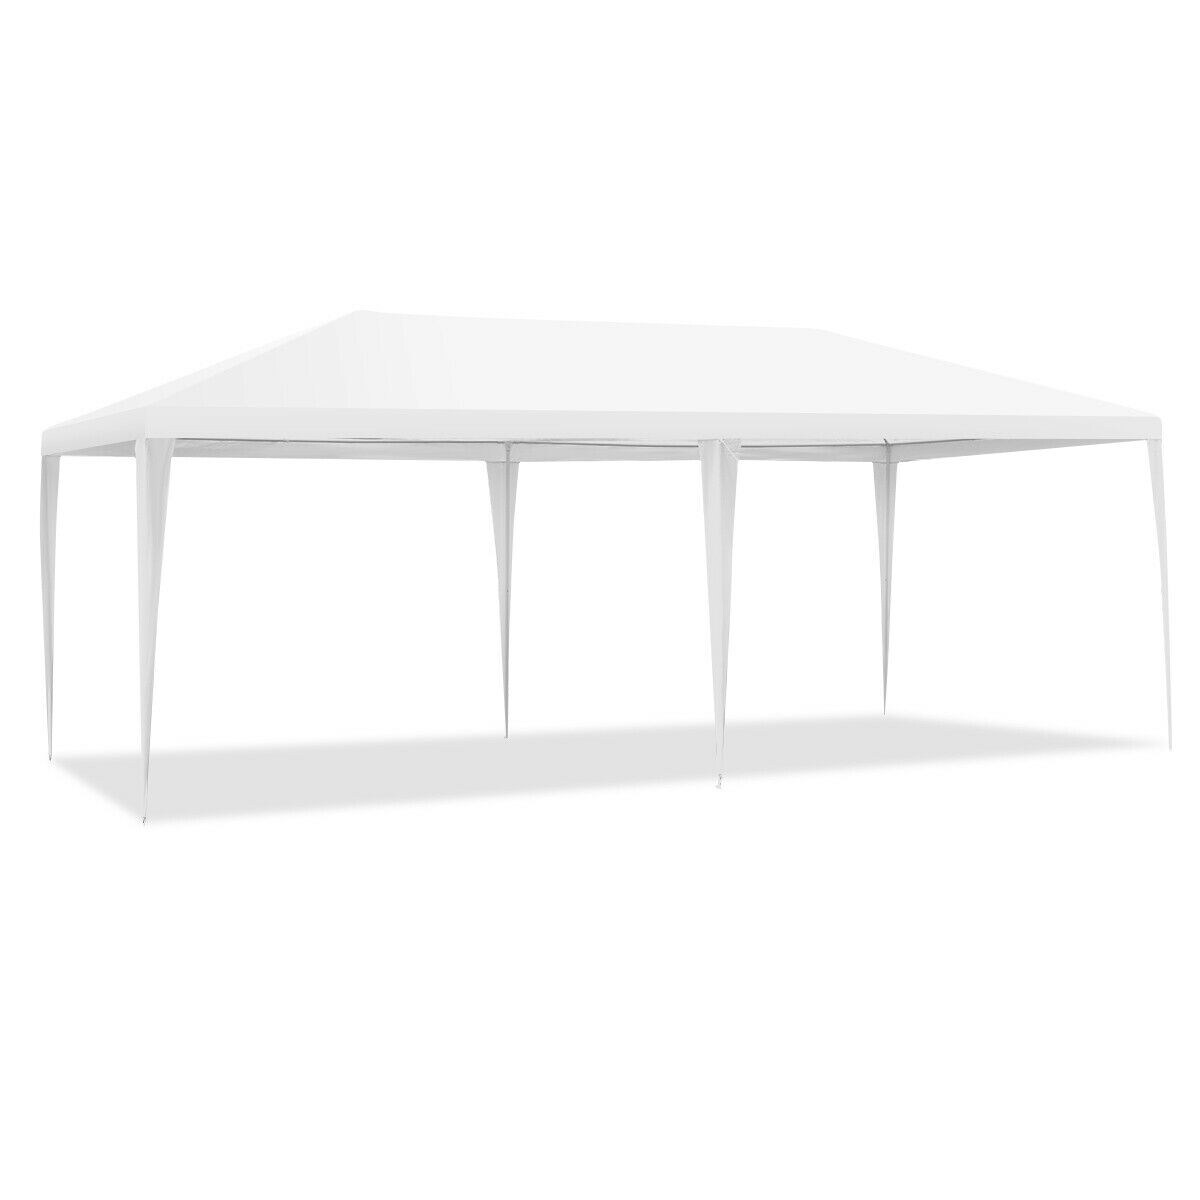 Forclover 20-ft x 10-ft Rectangle White Party Canopy in the Canopies ...